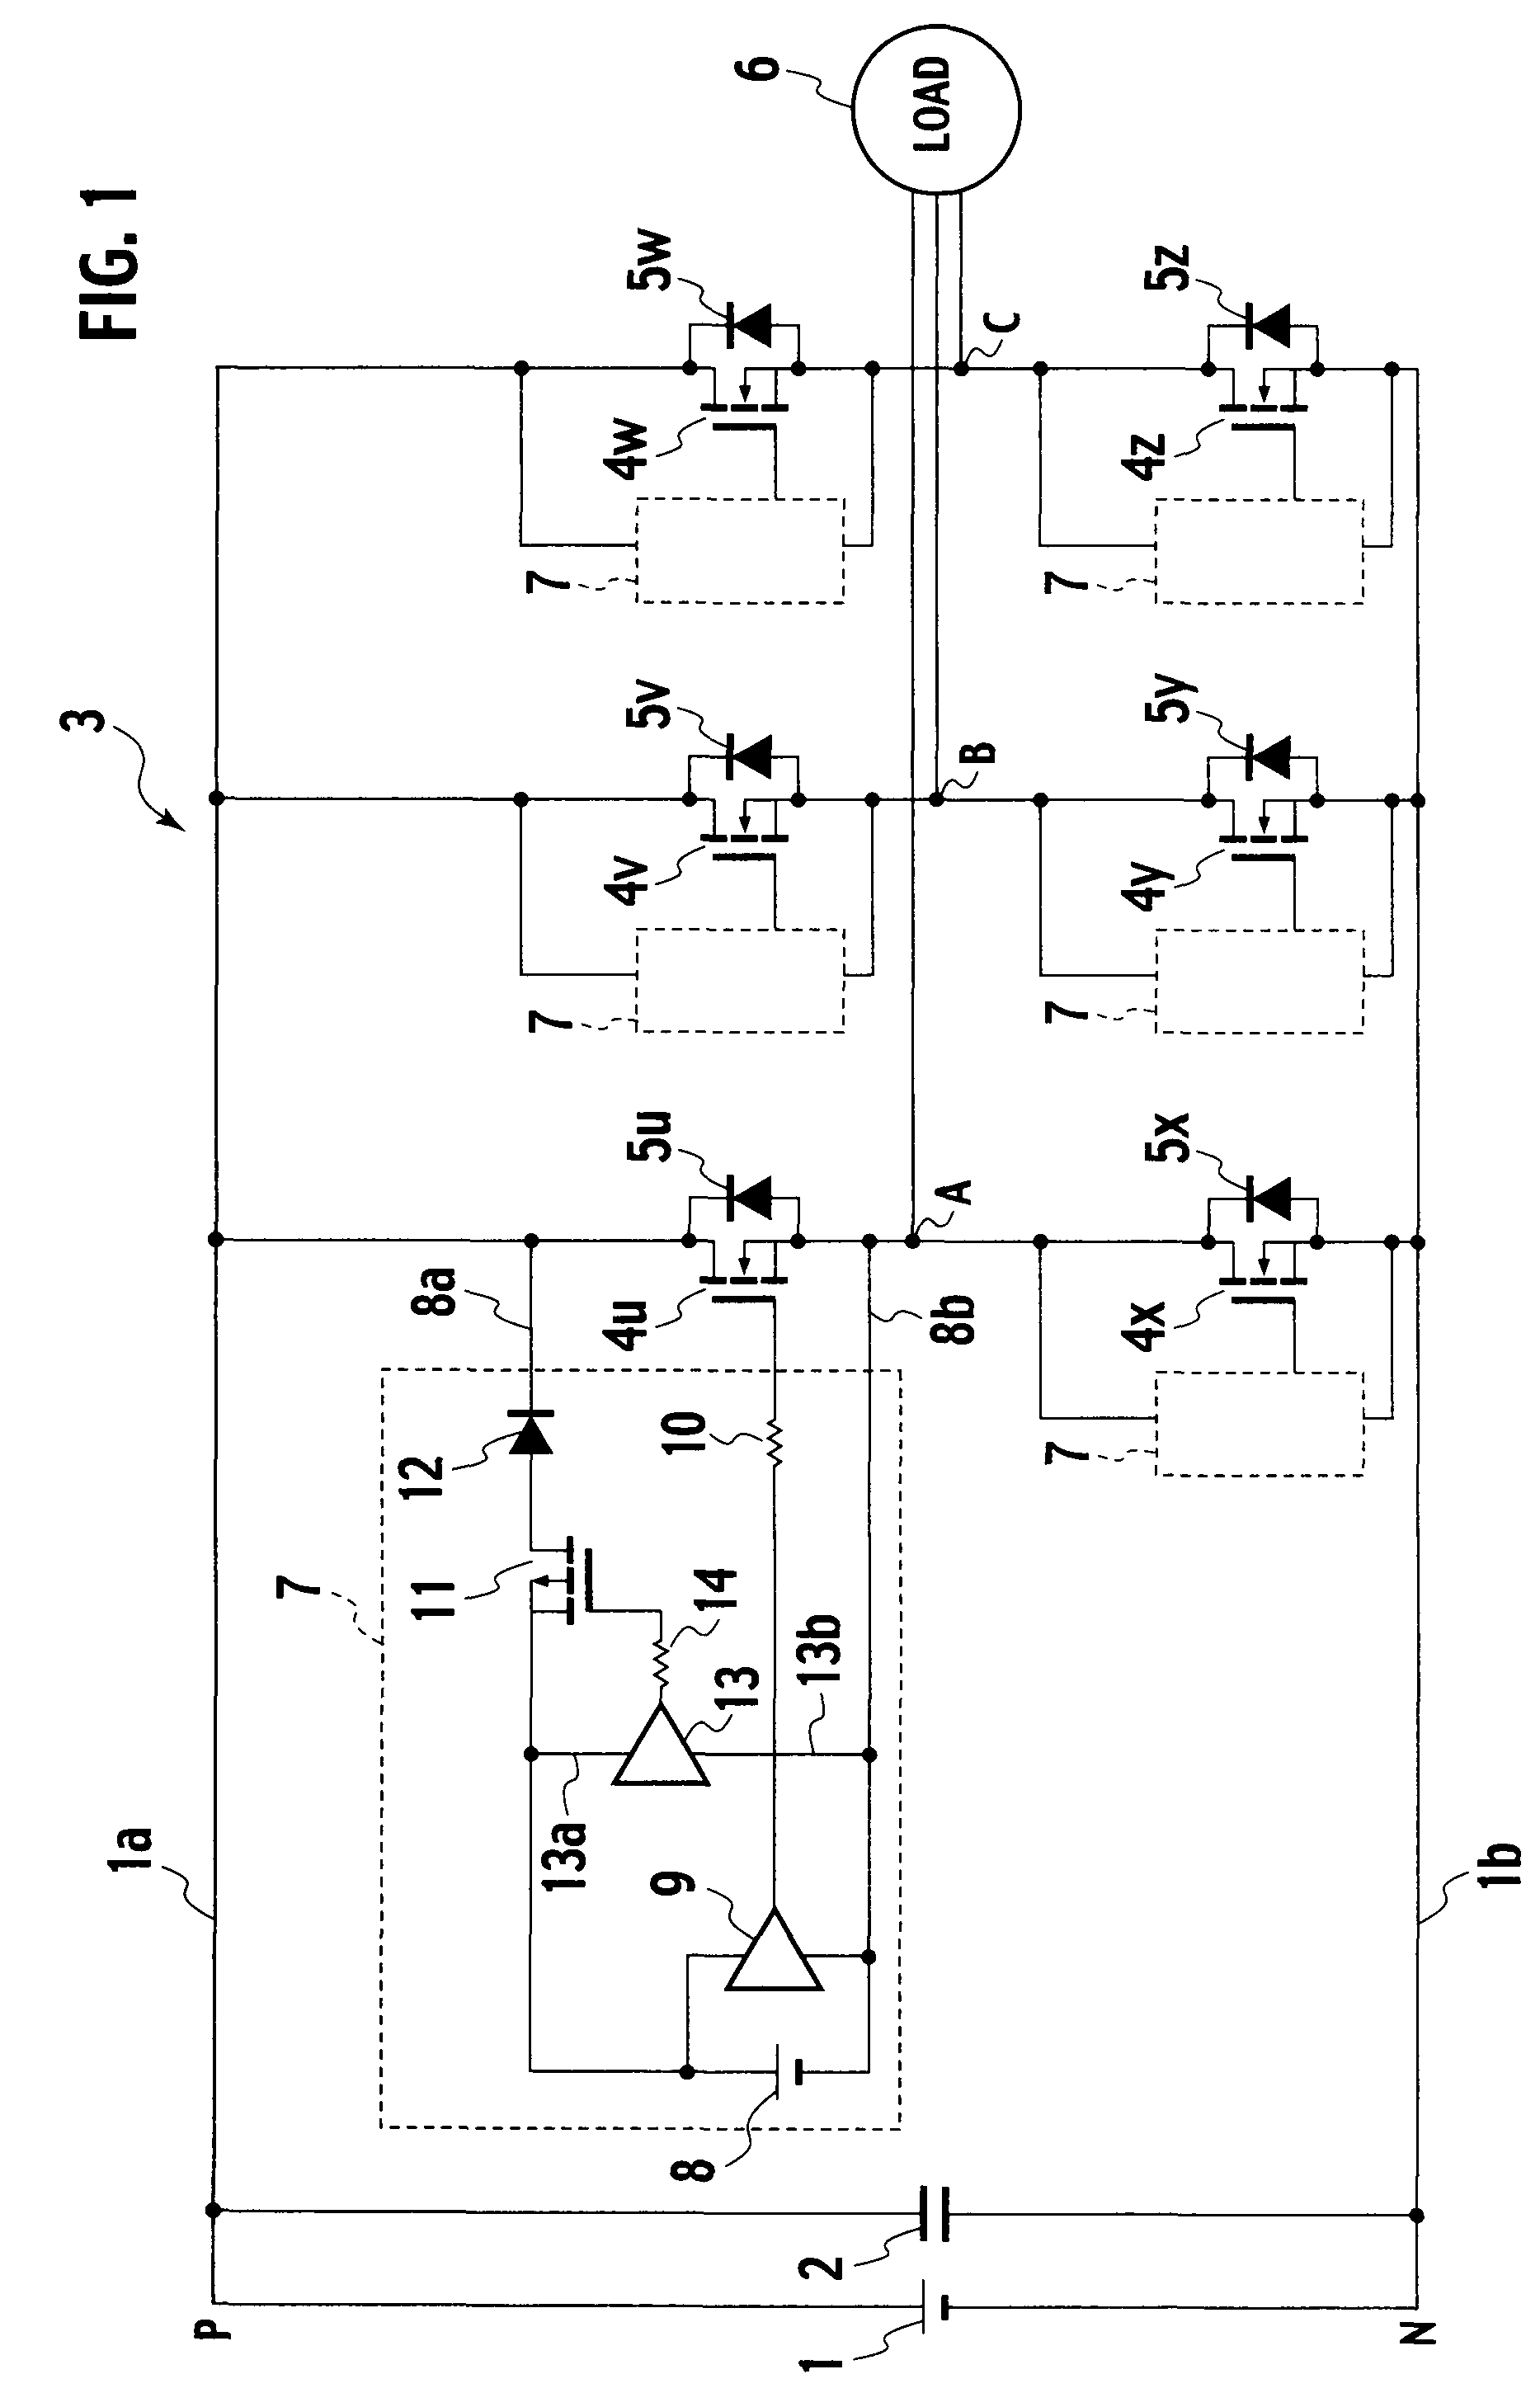 Electric power conversion system